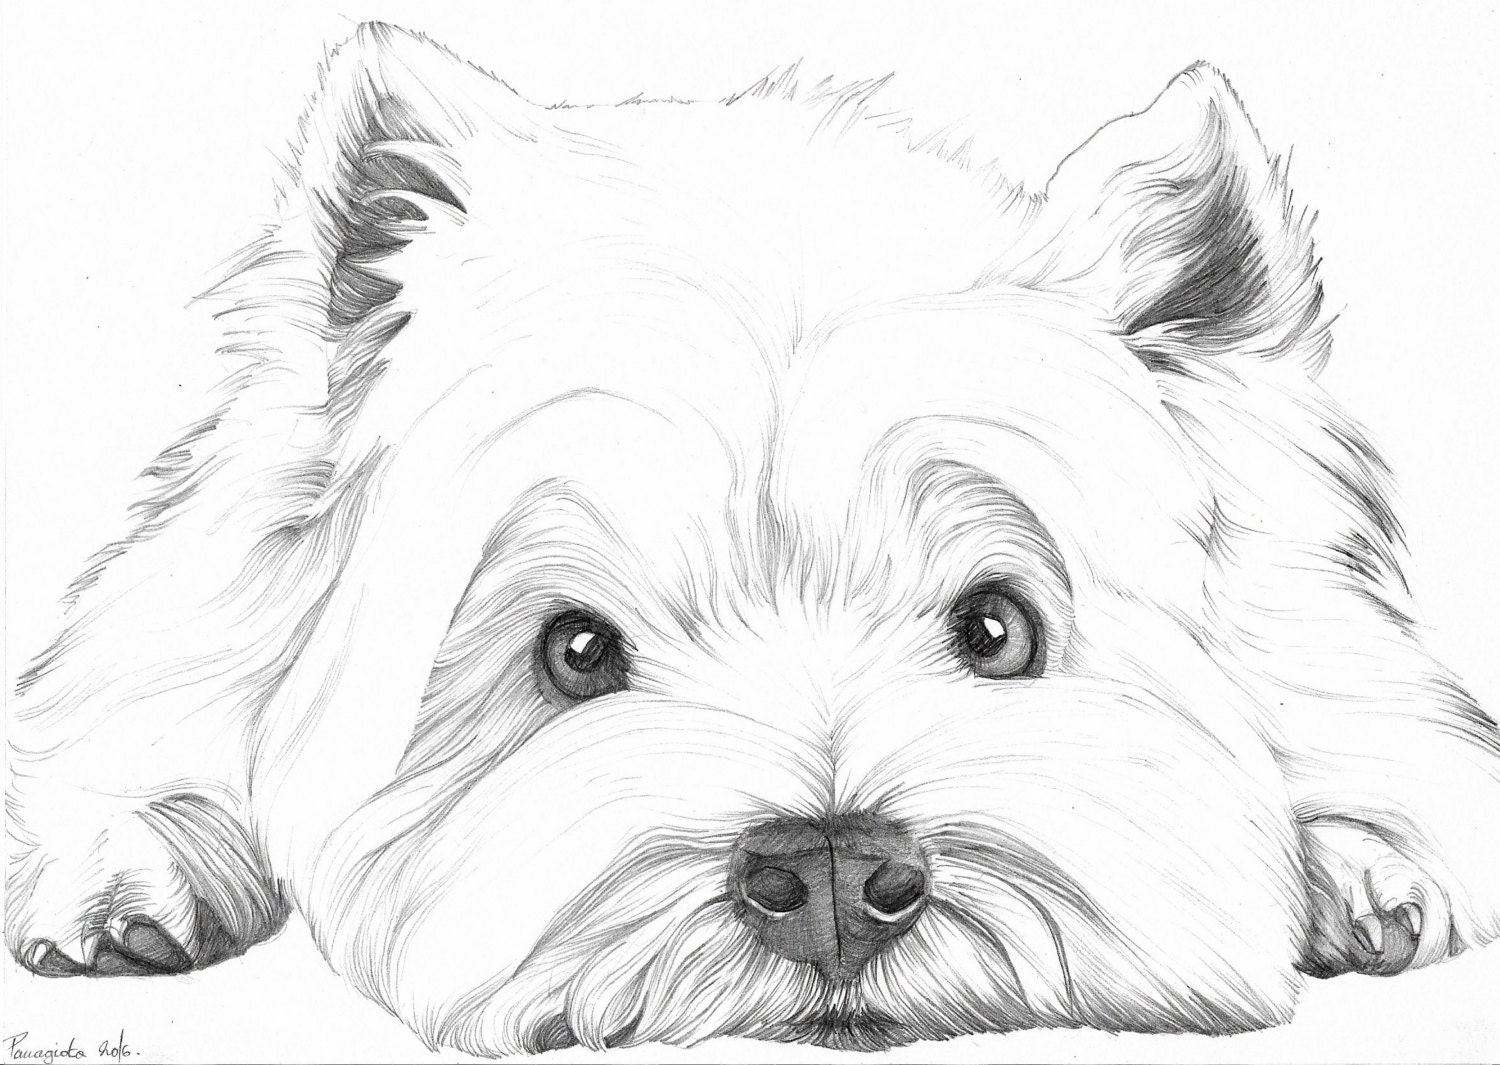 West Highland White Terrier Dog Pencil Drawing. by Panimagine